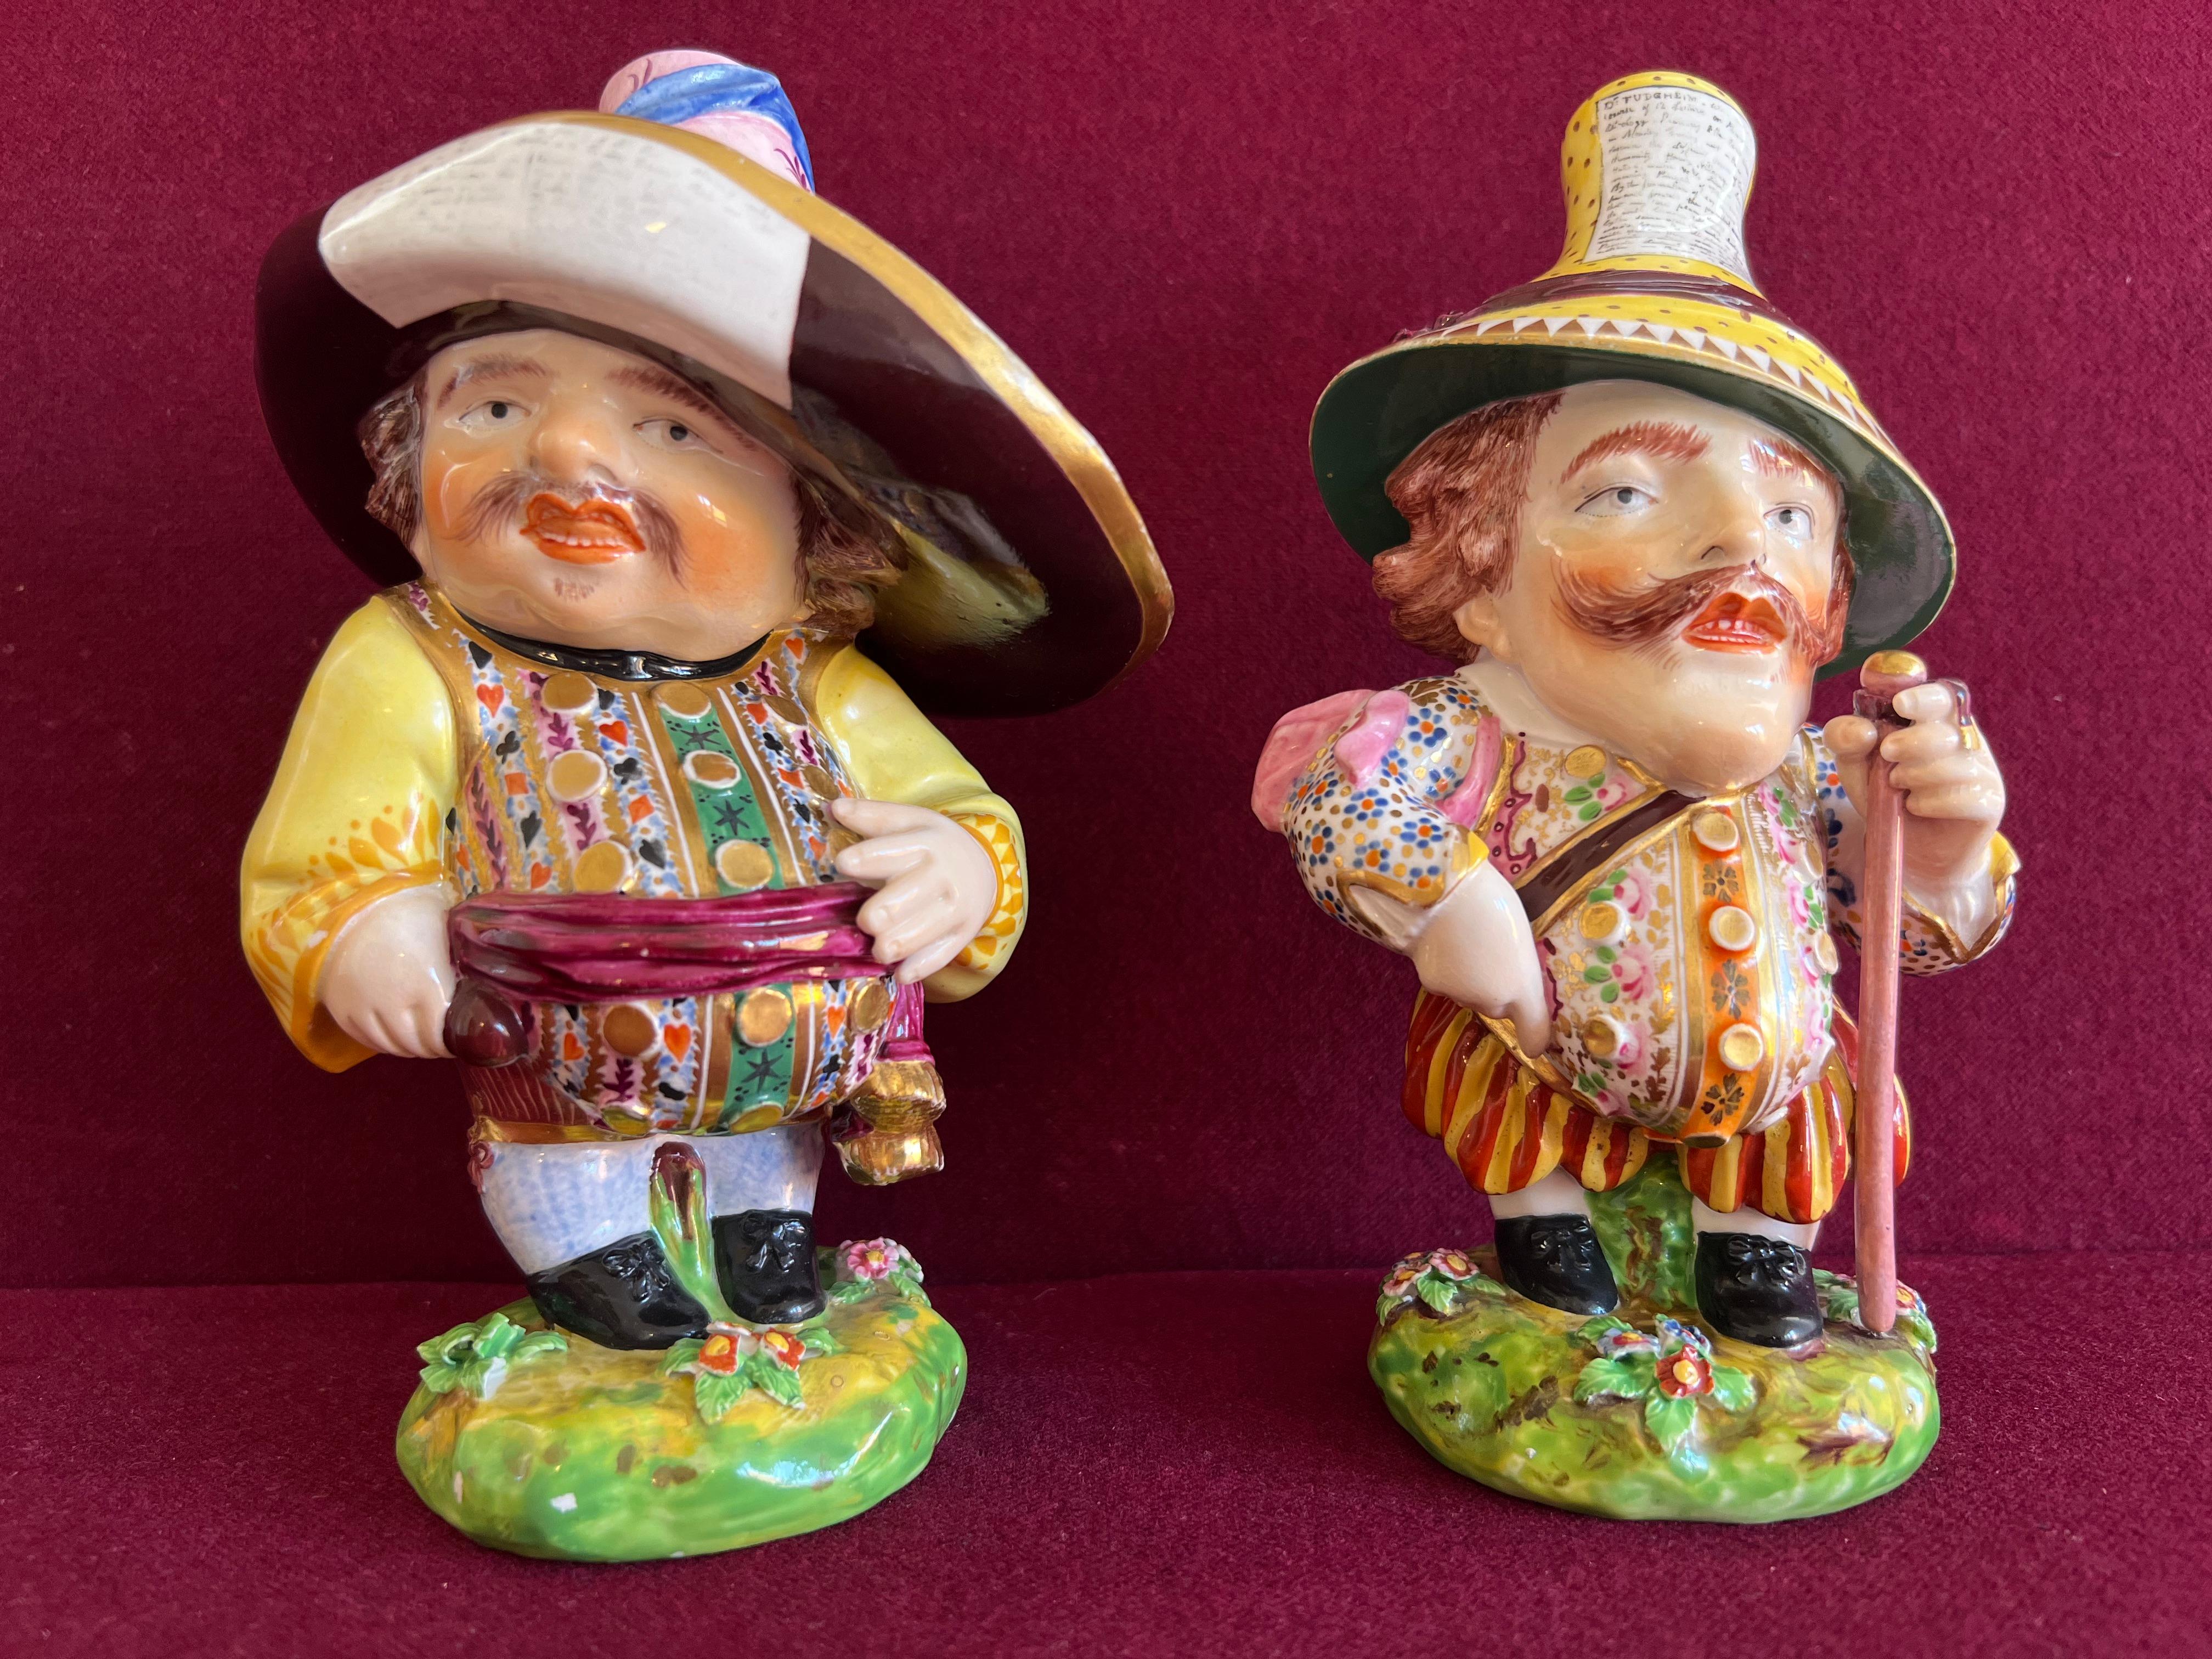 A fine pair of Bloor Derby ‘Mansion House’ Dwarfs c.1825. Each moustached figure modelled wearing a comically large hat bearing an advertisement, one wearing a tasselled sash about his rotund belly, the other with polka dots on his shirt sleeves, a